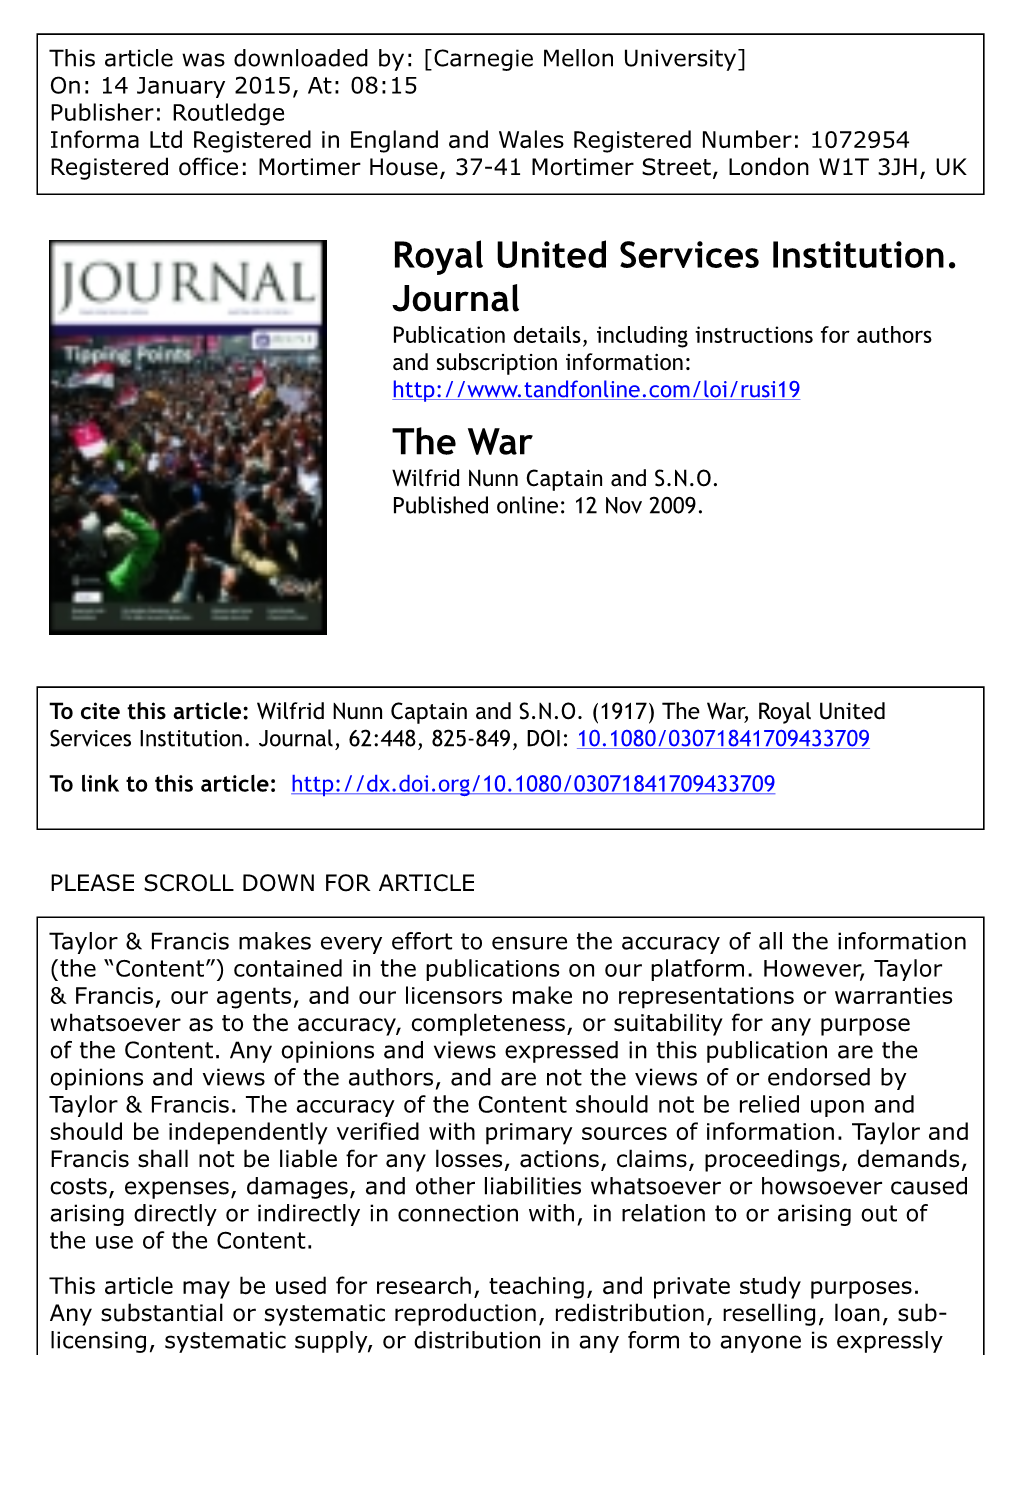 Royal United Services Institution. Journal The